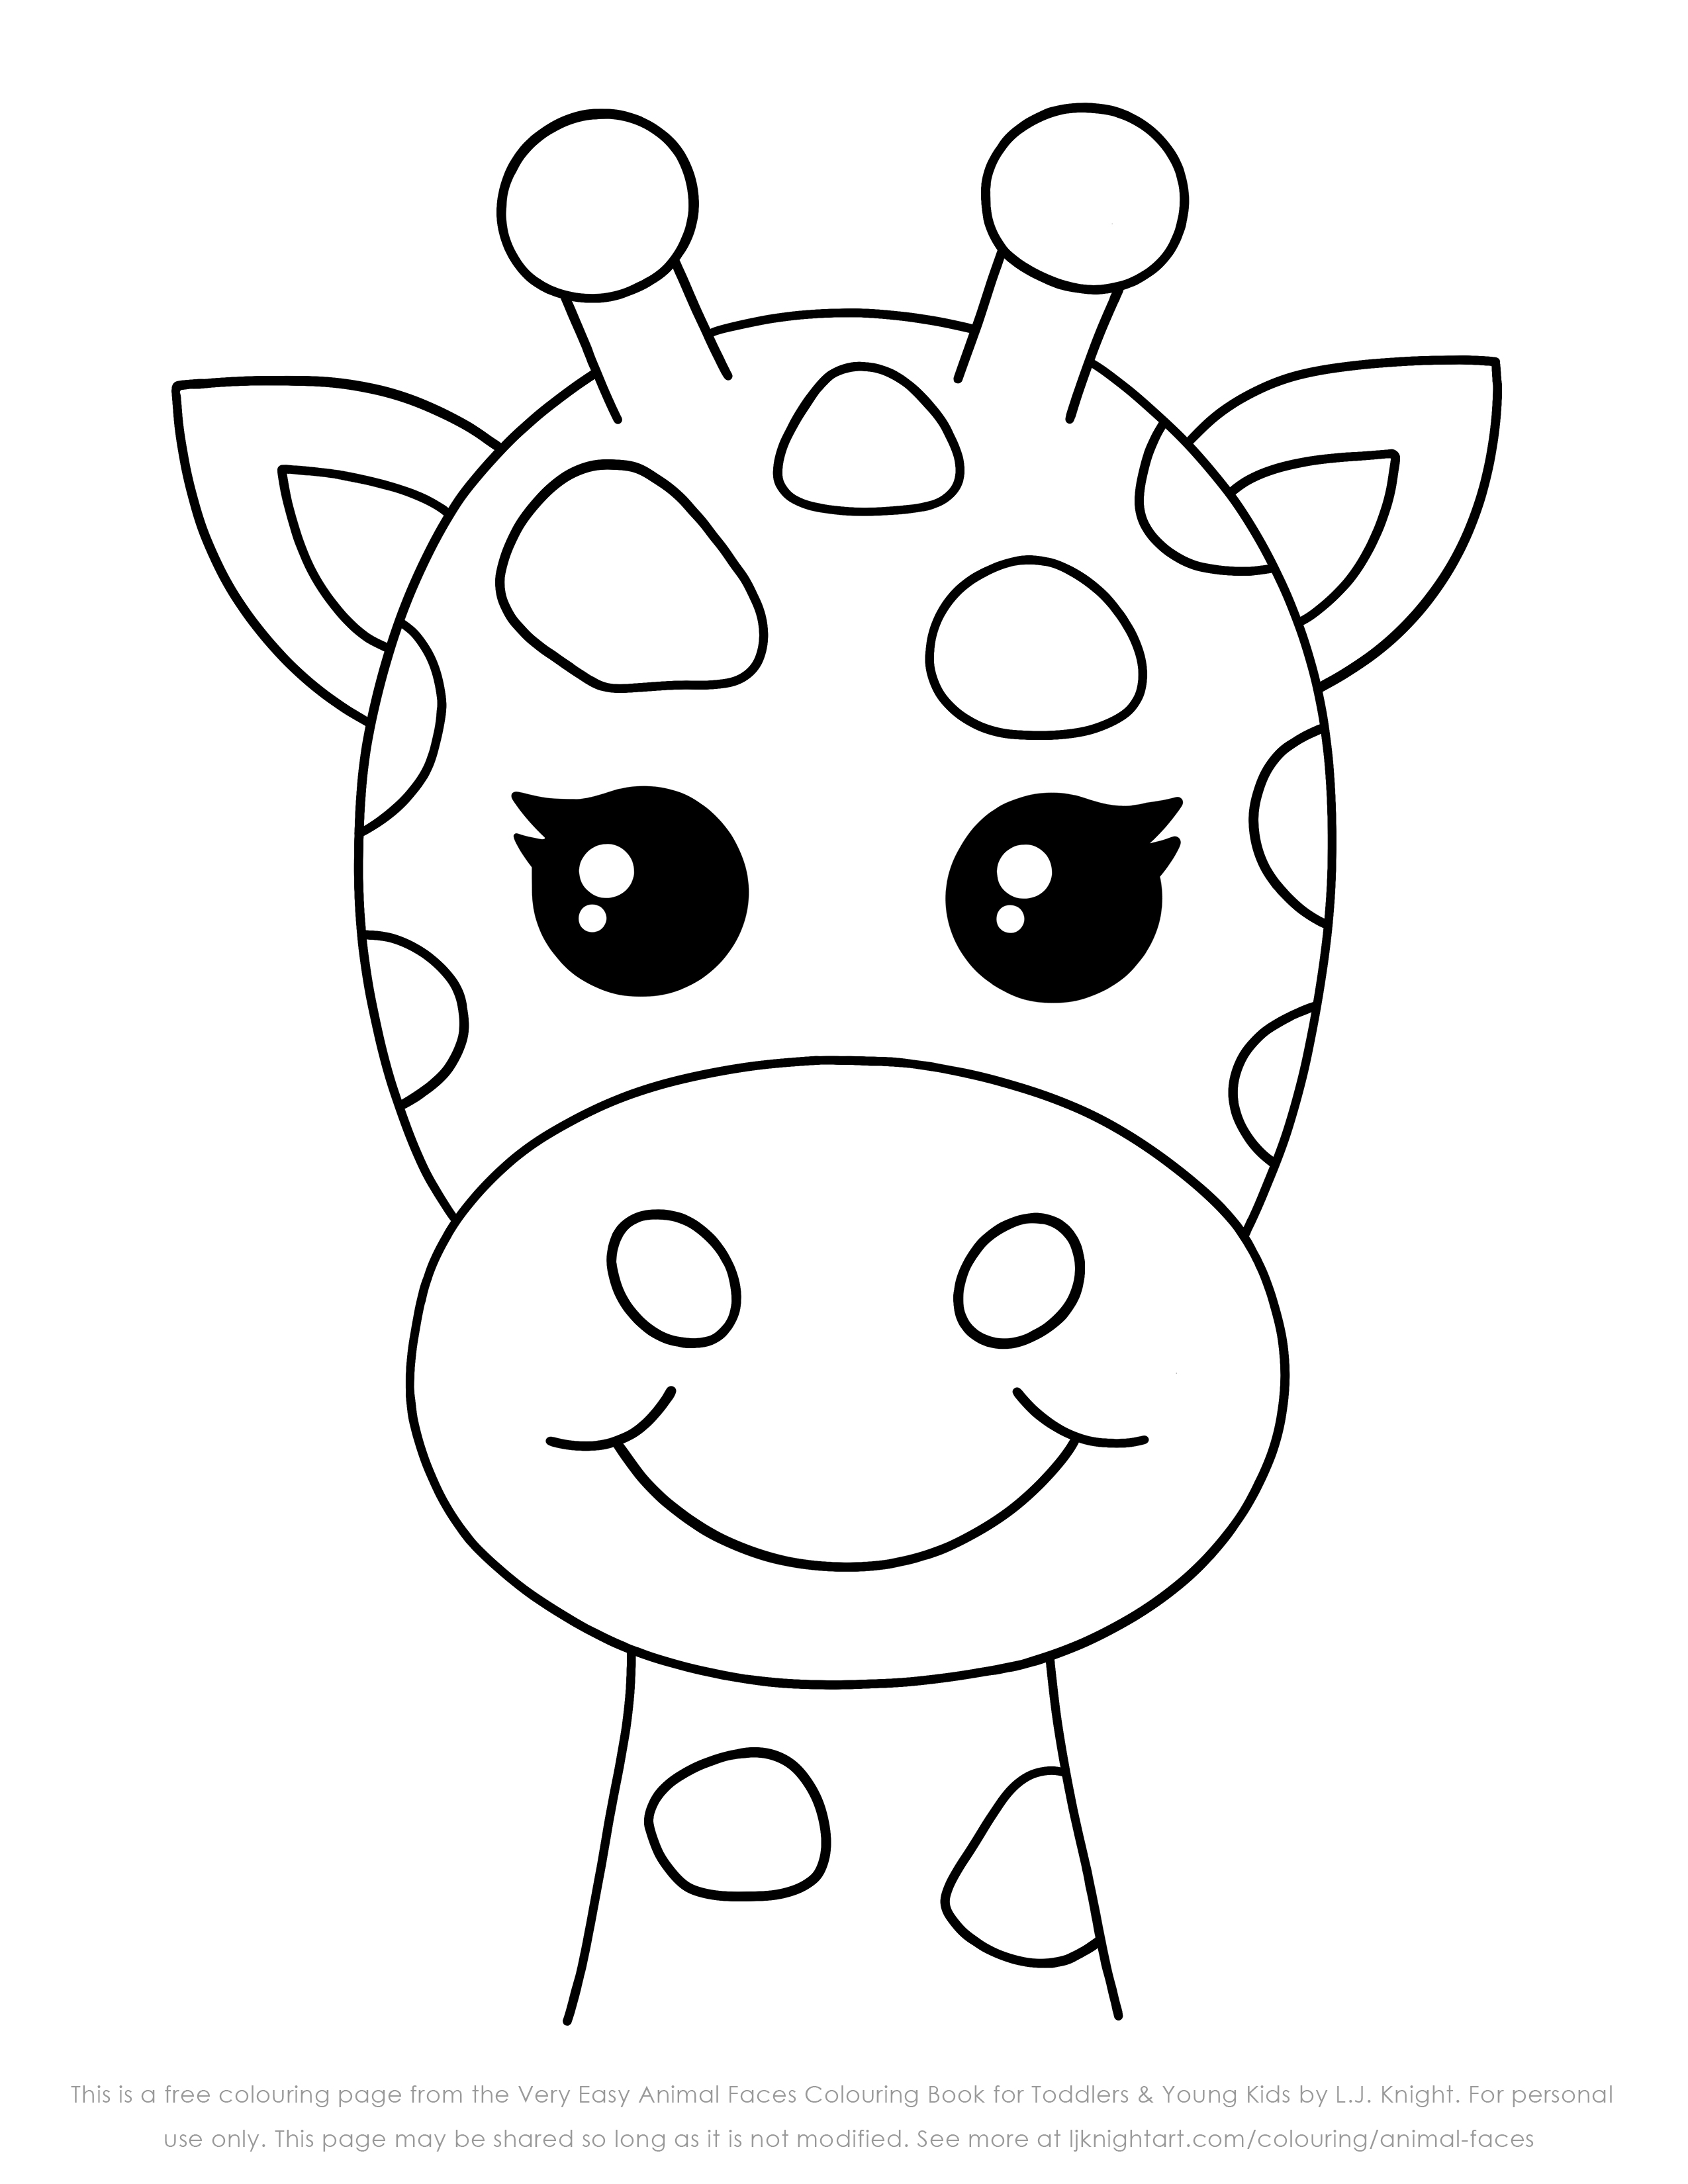 Free Easy Giraffe Colouring Page for Kids   L.J. Knight